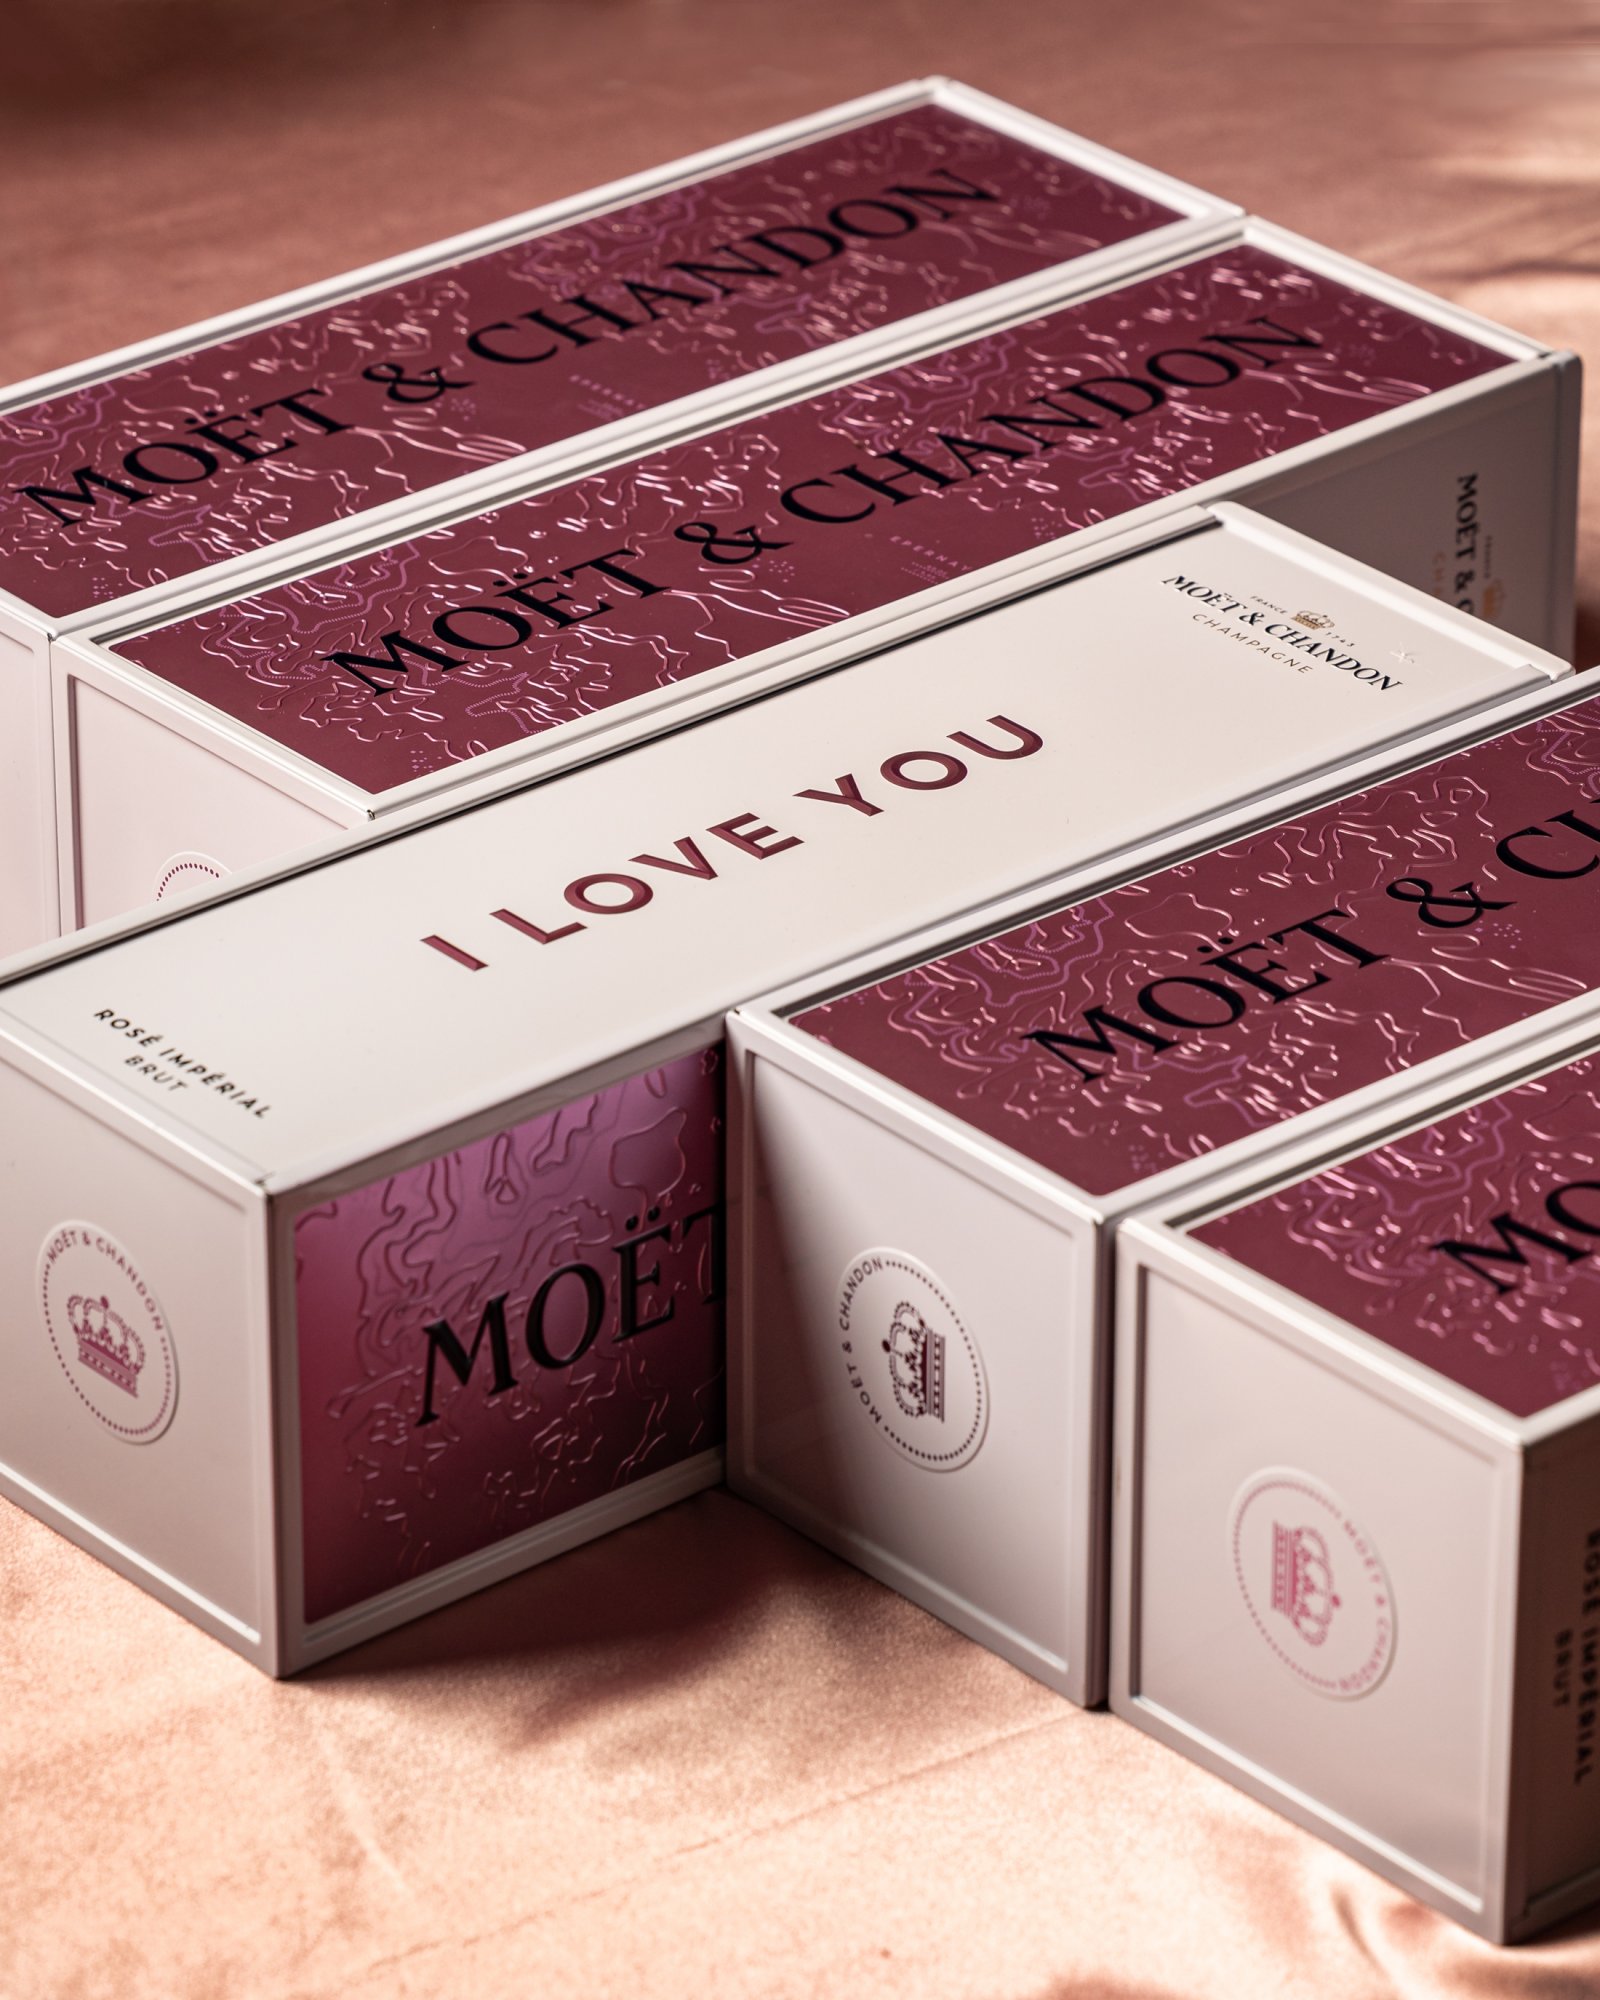 Spread the love with Moët & Chandon